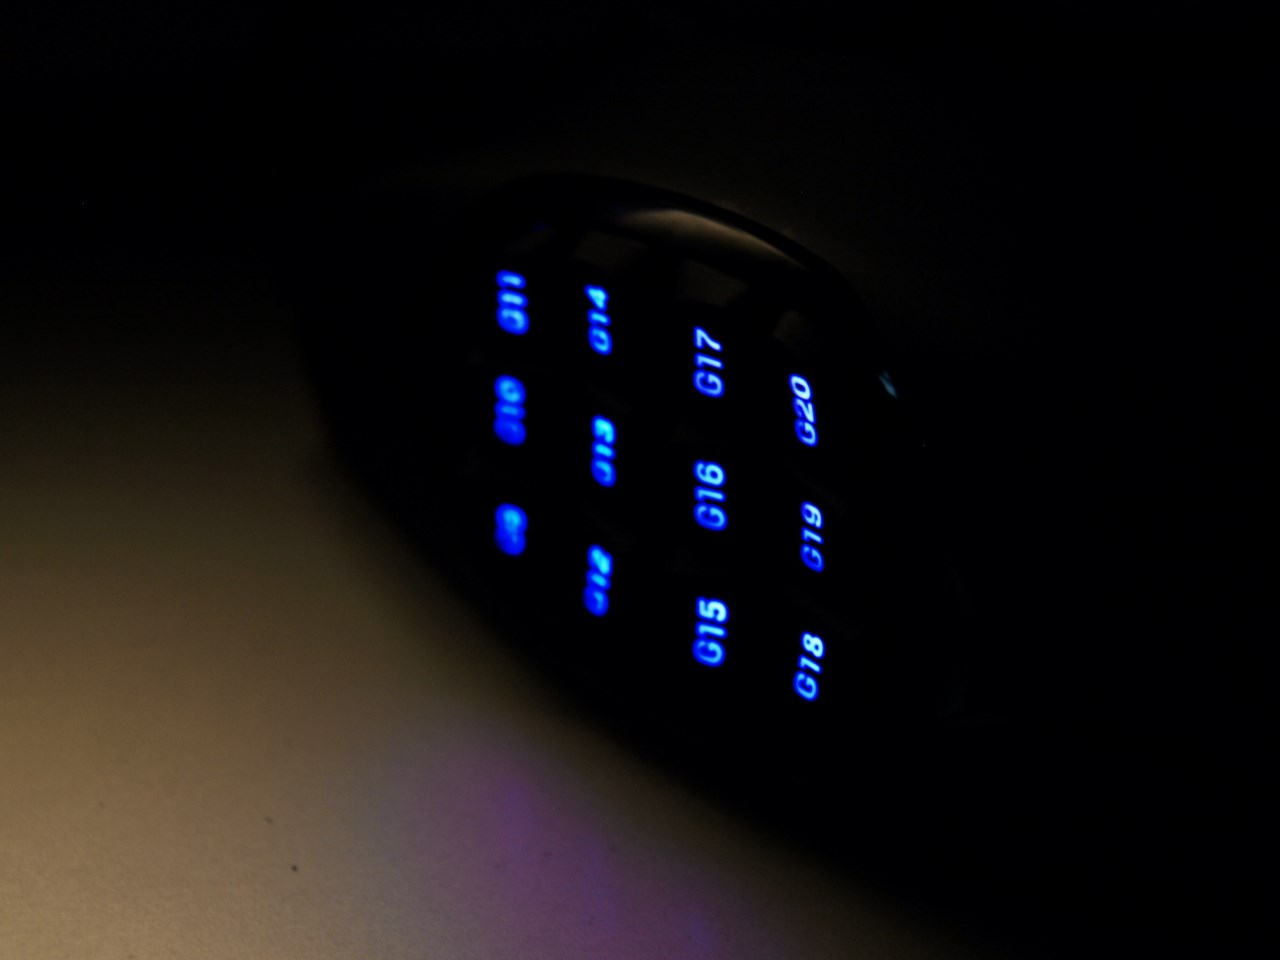 Logitech G600 MMO Review - 20-Button Laser Gaming Mouse